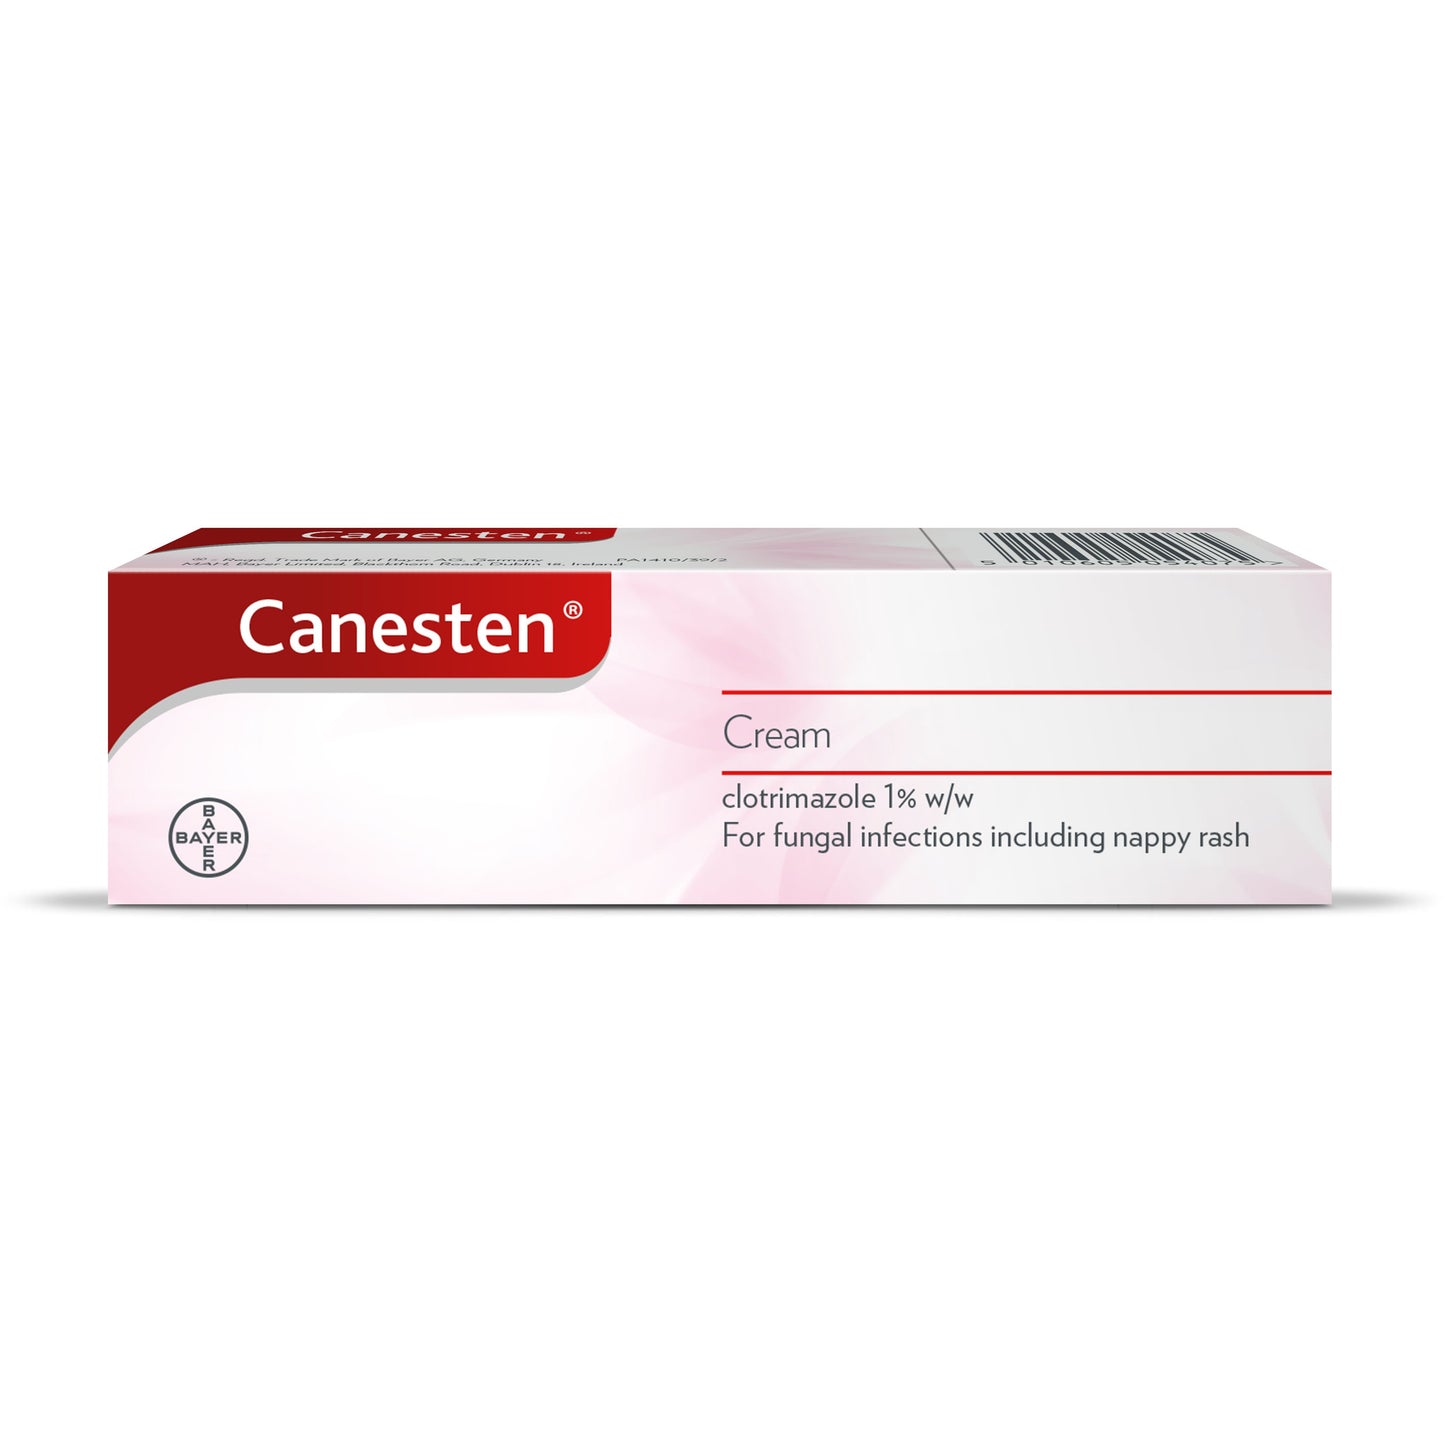 Canesten 1% Cream 50g, for External Thrush (Candida) & Fungal Skin Infections